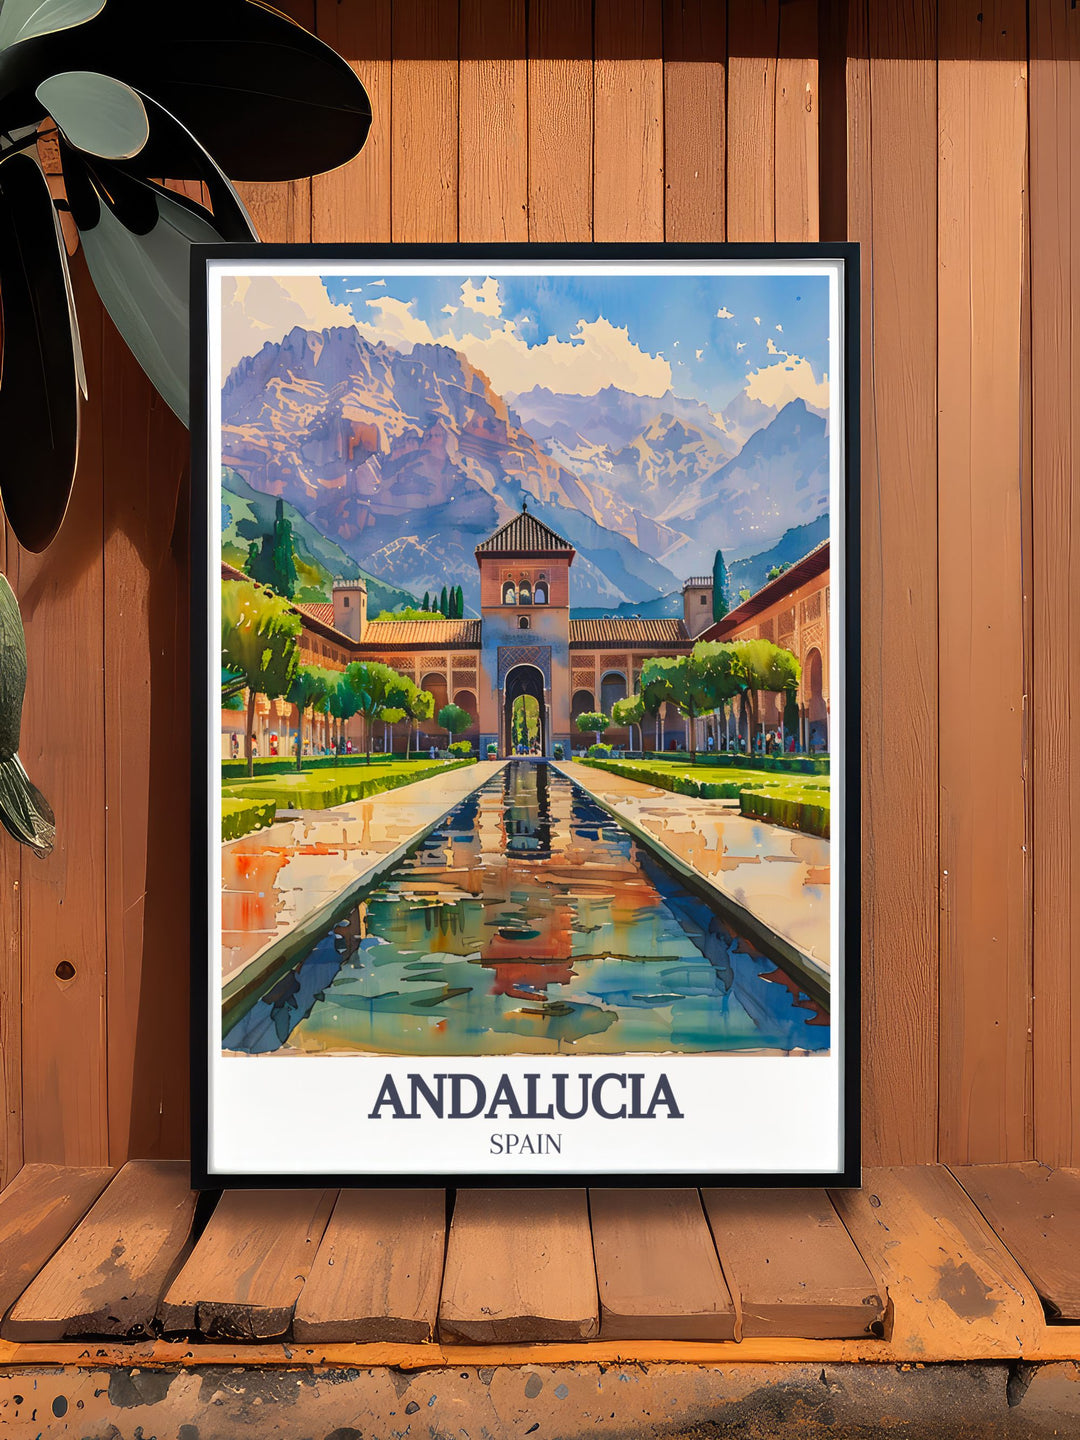 Highlighting the serene elegance of the Alhambra Palace and the dramatic Sierra Nevada Mountains, this poster showcases the rich history and natural beauty of Andalucia, making it a perfect addition to any decor.